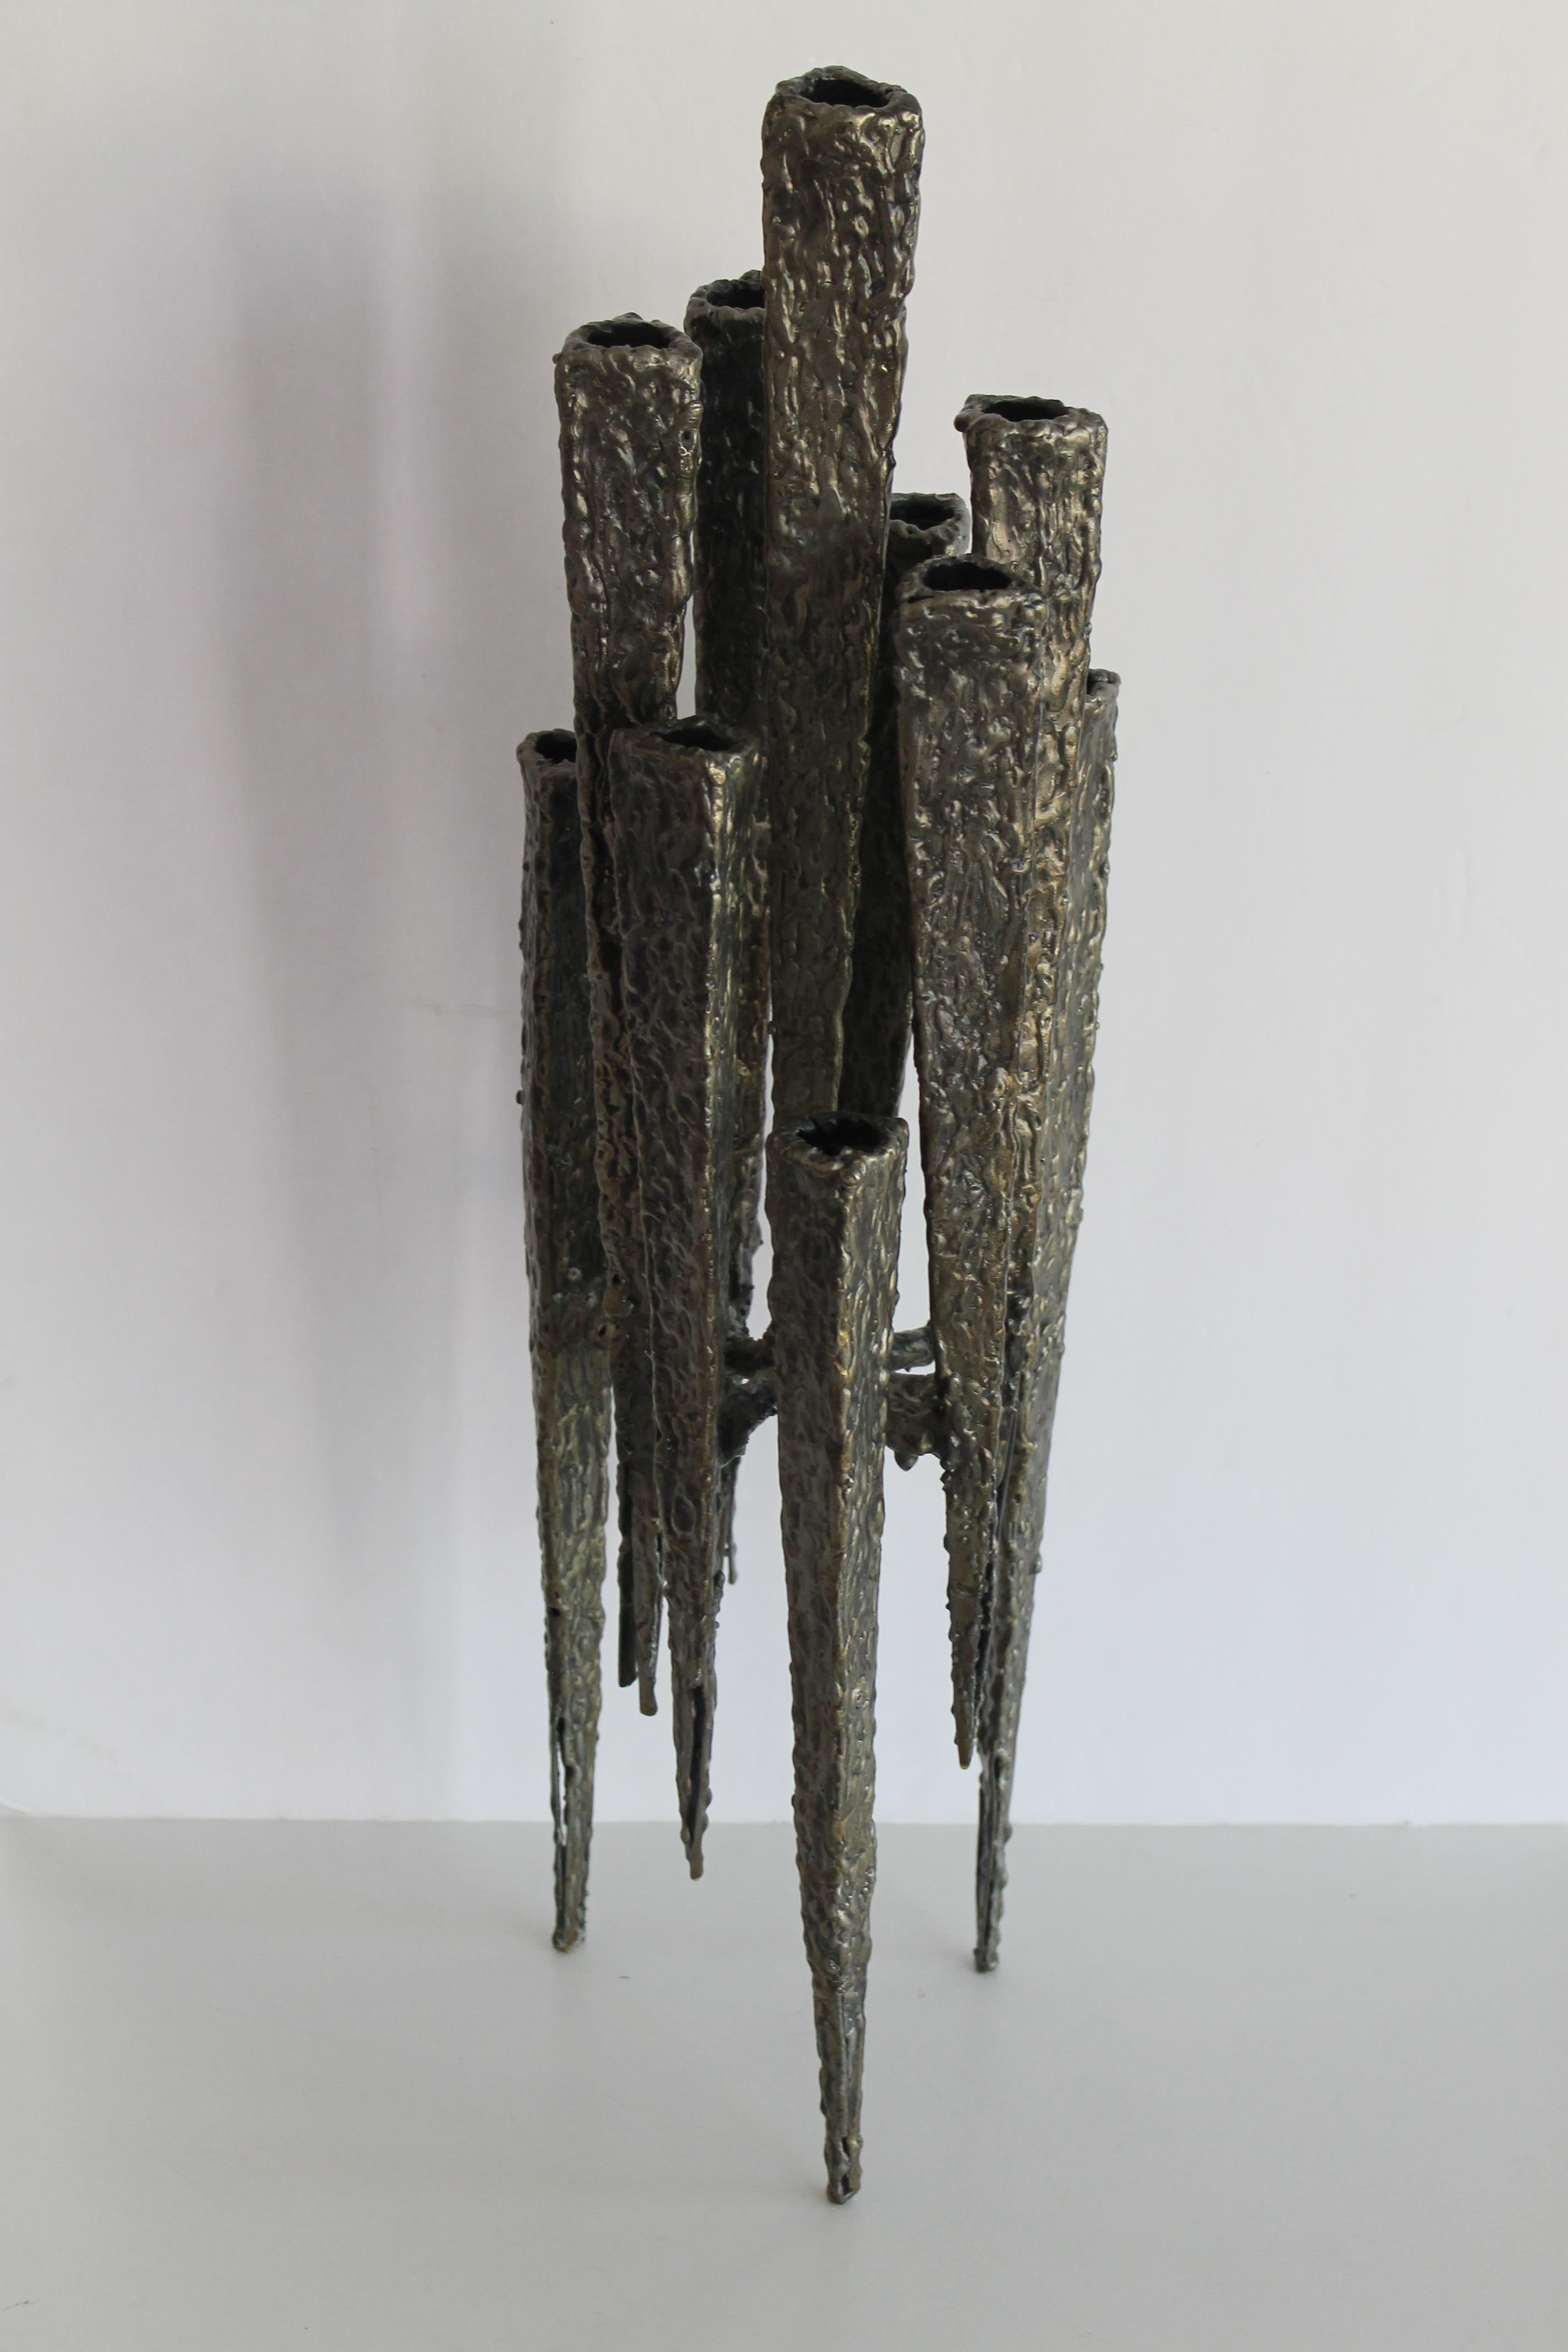 A welded steel mid century candlestick sculpture, ten vertical elements at different levels. 1970's modern form, reminiscent of Paul Evans' work. Measures: 6